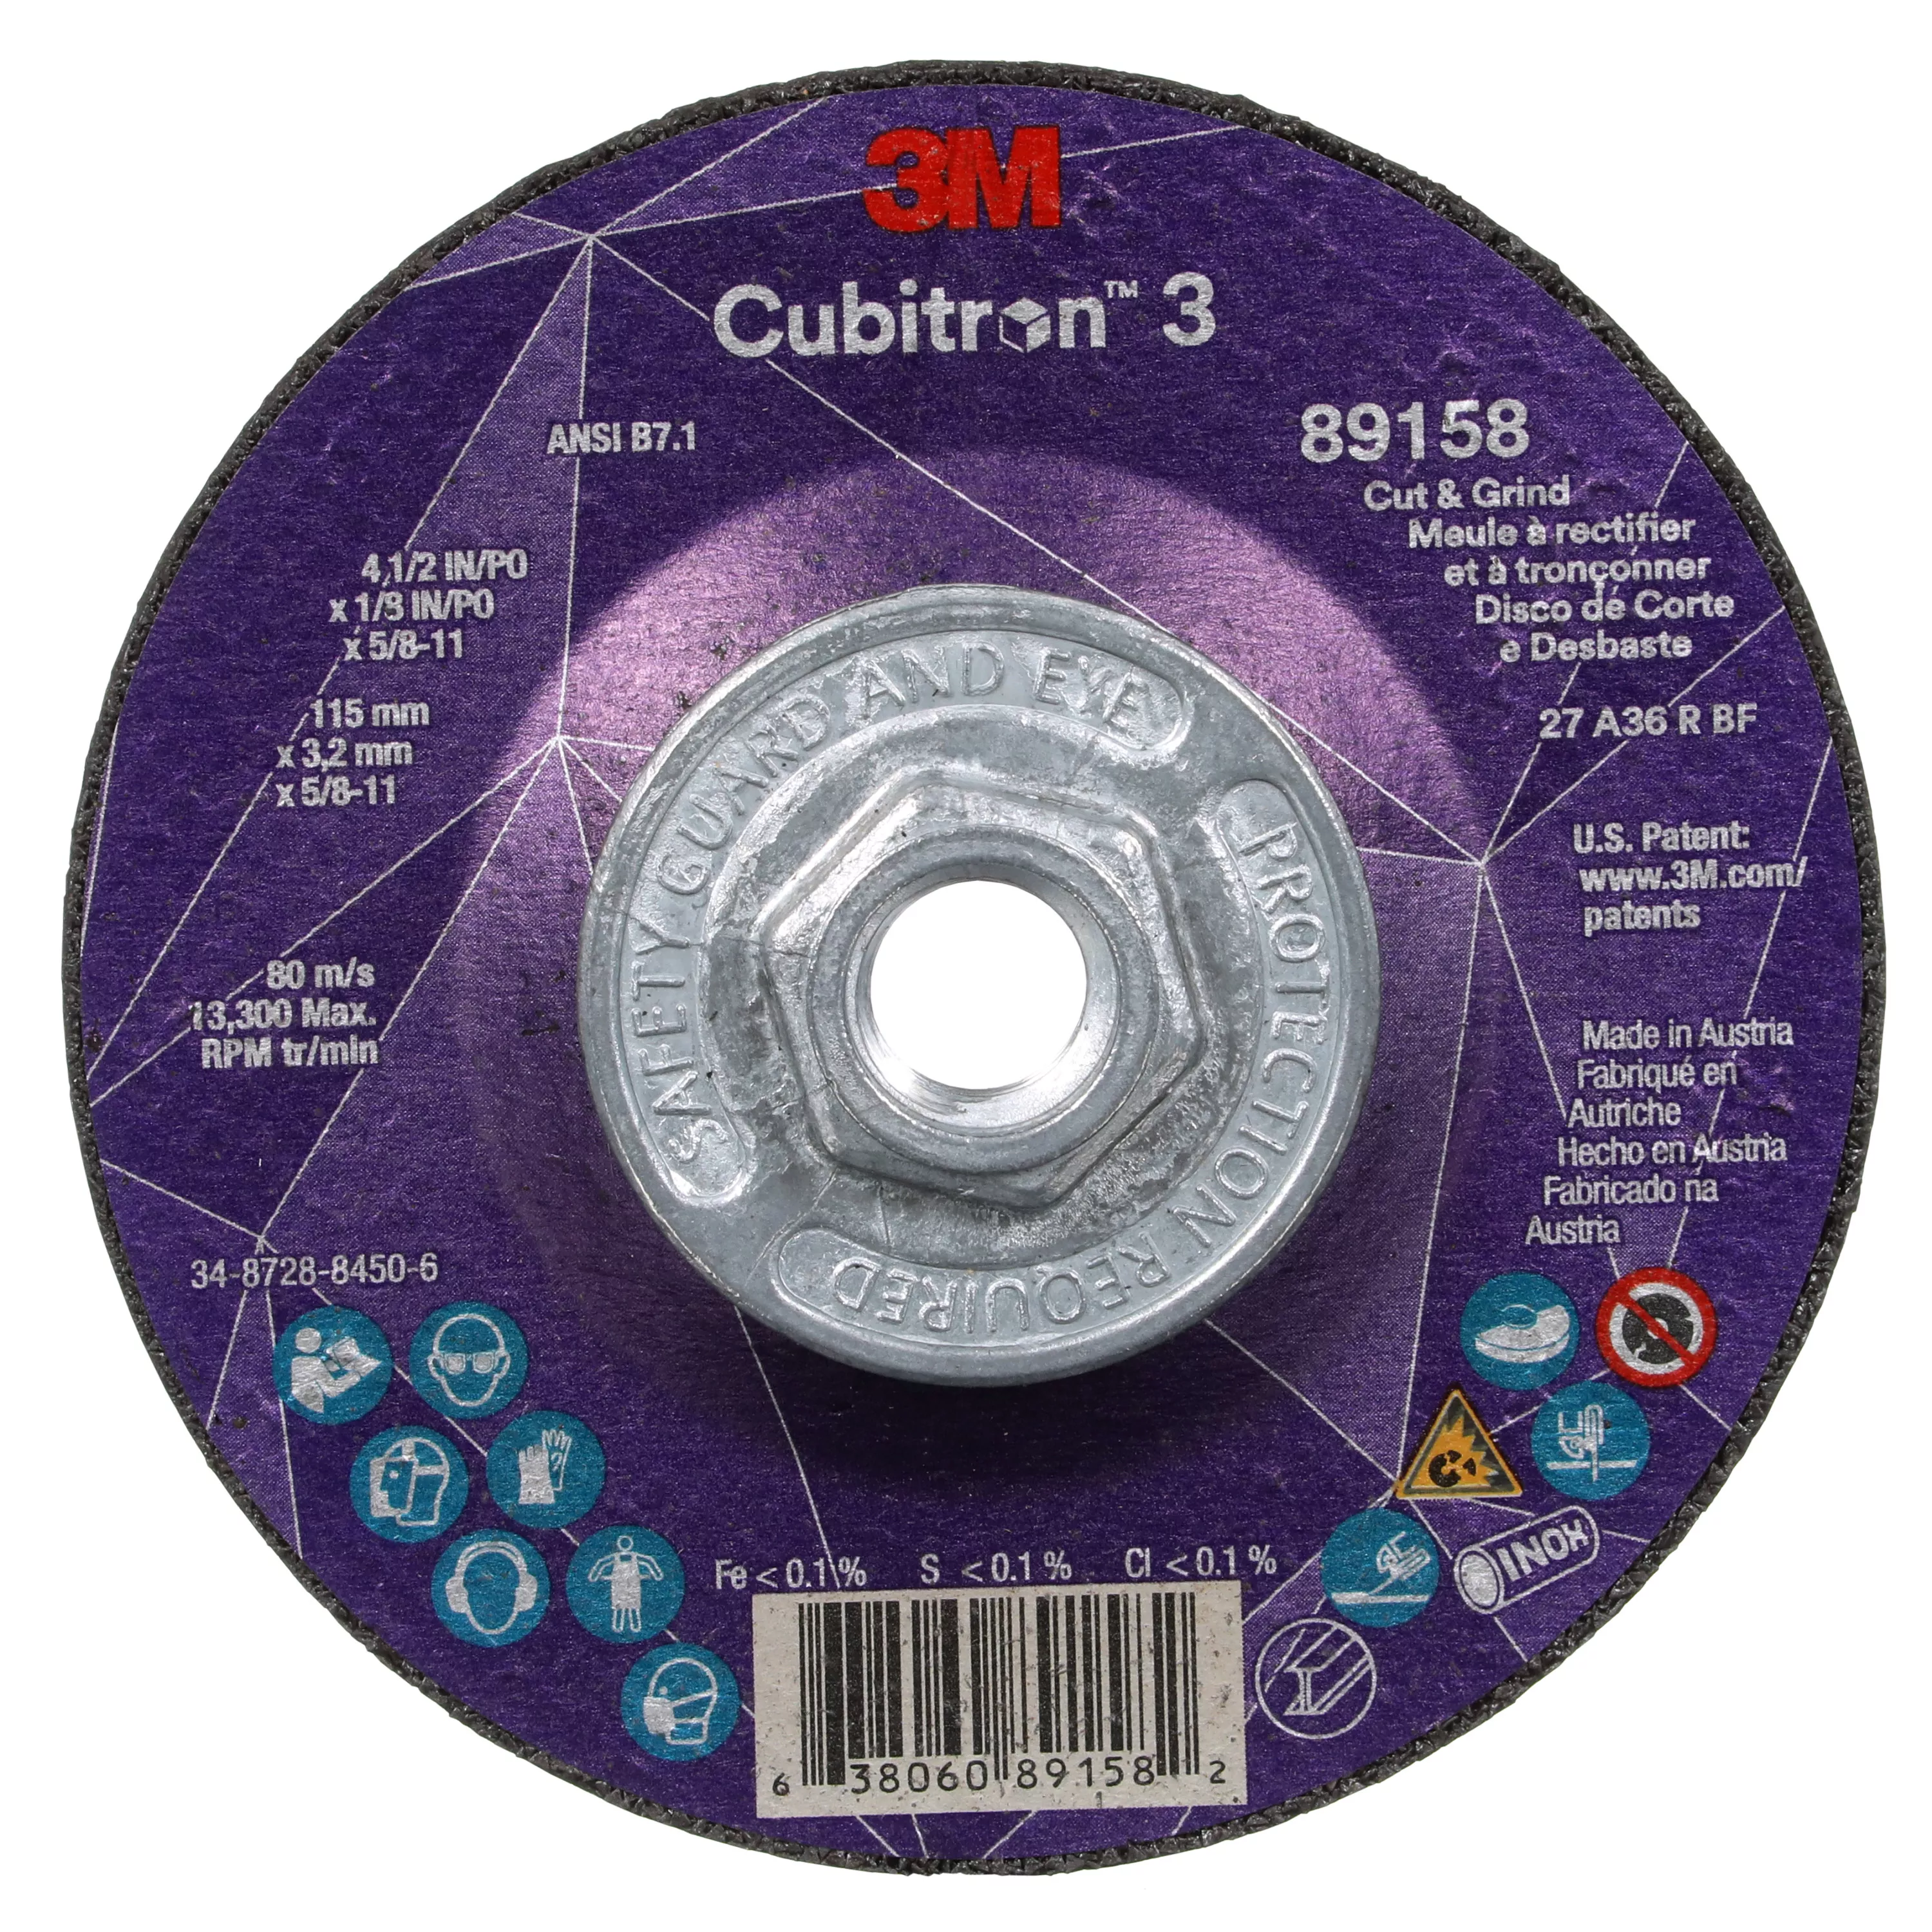 3M™ Cubitron™ 3 Cut and Grind Wheel, 89158, 36+, T27, 4-1/2 in x 1/8 in
x 5/8 in-11 (115 x 3.2 mm x 5/8-11 in), ANSI, 10 ea/Case